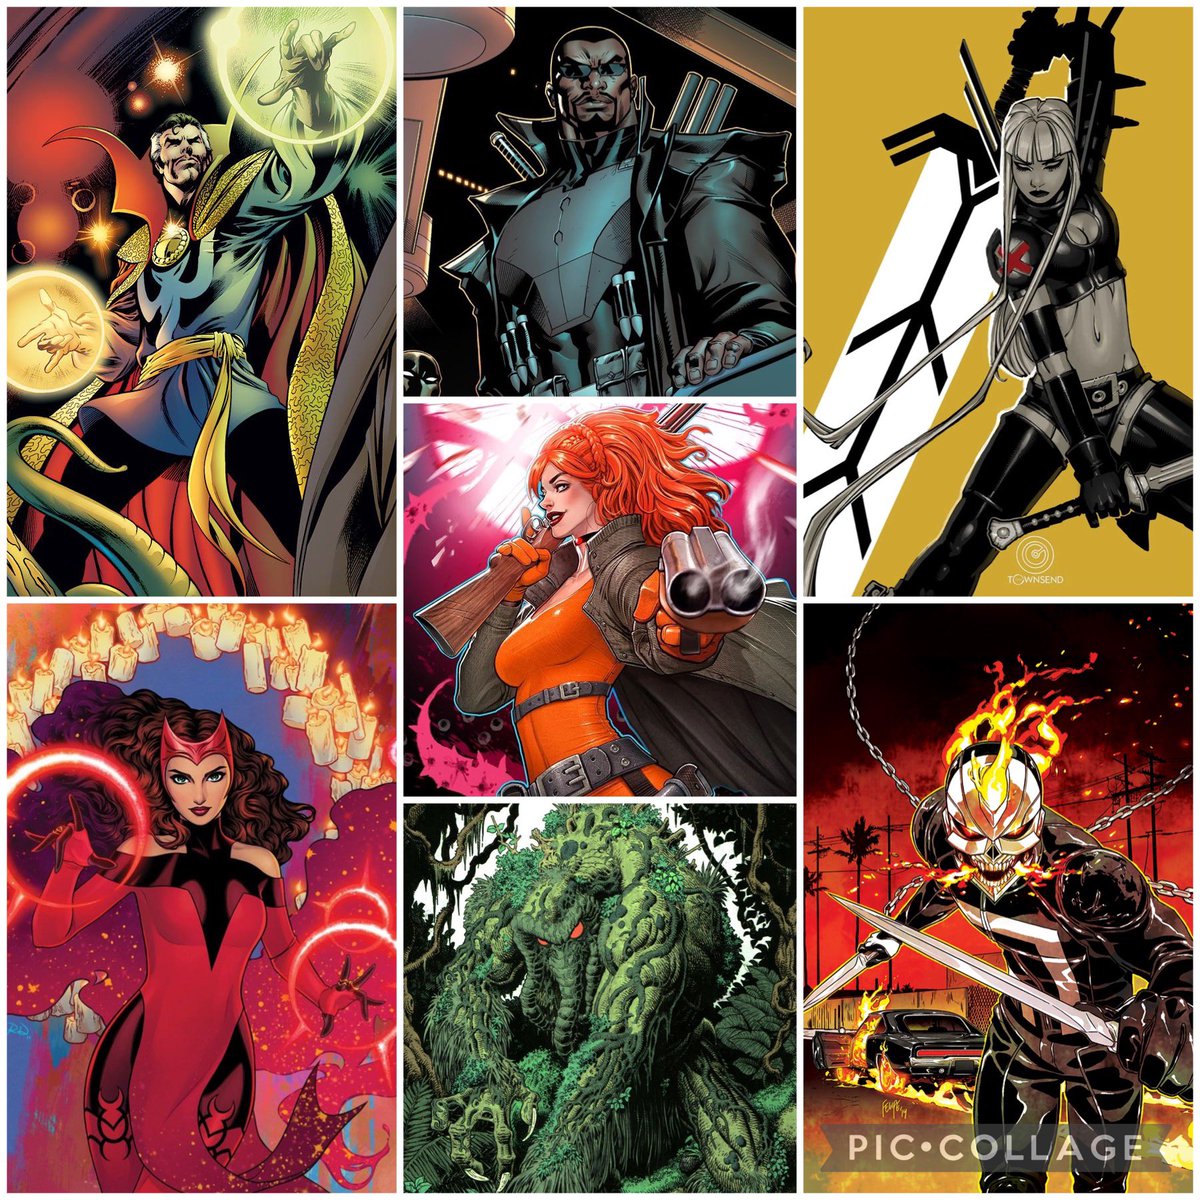 Technically, that would just be the Midnight Suns (or Sons if read Ghost Rider comics in the 90s like me), but in any case:

Doctor Strange
Scarlet Witch
Blade
Elsa Bloodstone
Man-Thing
Magik
Ghost Rider (Danny Reyes)